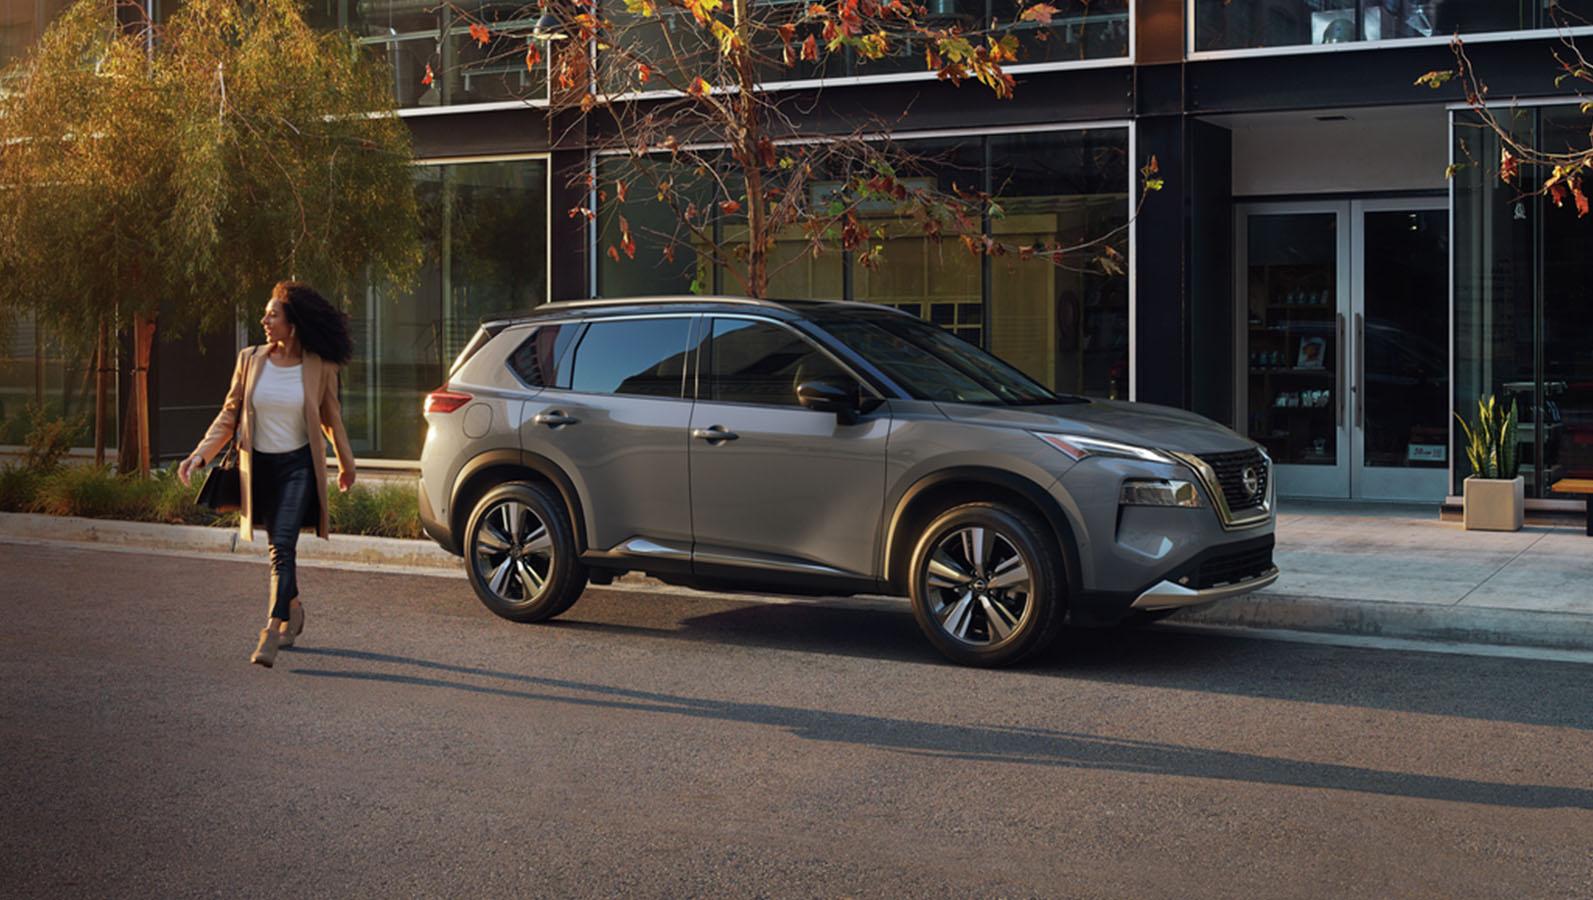 Gray 2023 Nissan Rogue parked on a road